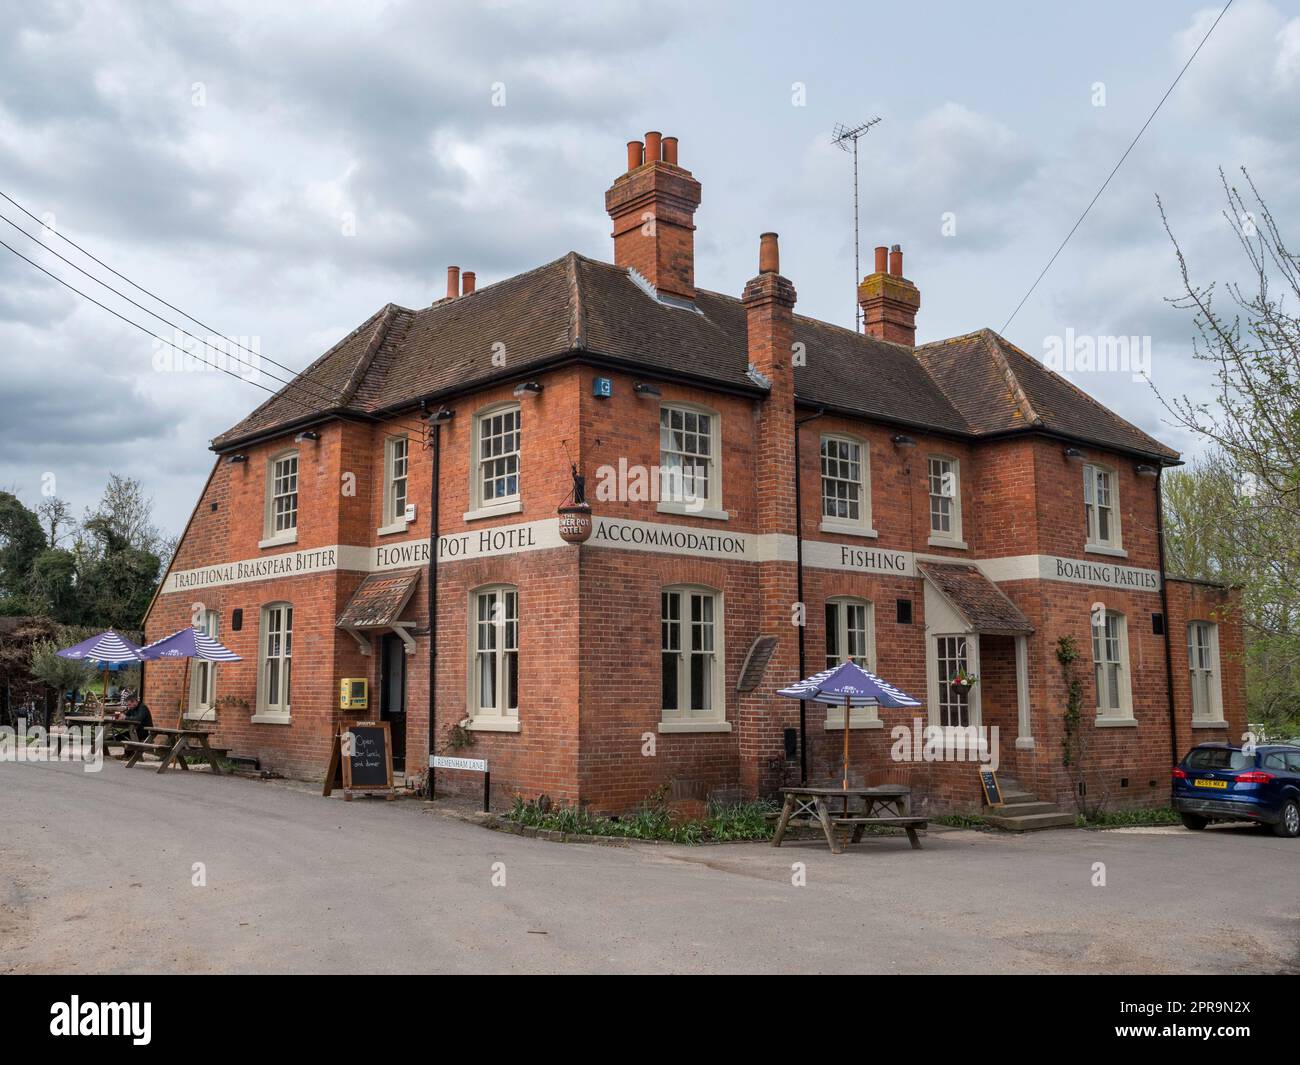 The Flower Pot Hotel in Aston, Henley-On-Thames, Oxfordshire, England. Stock Photo